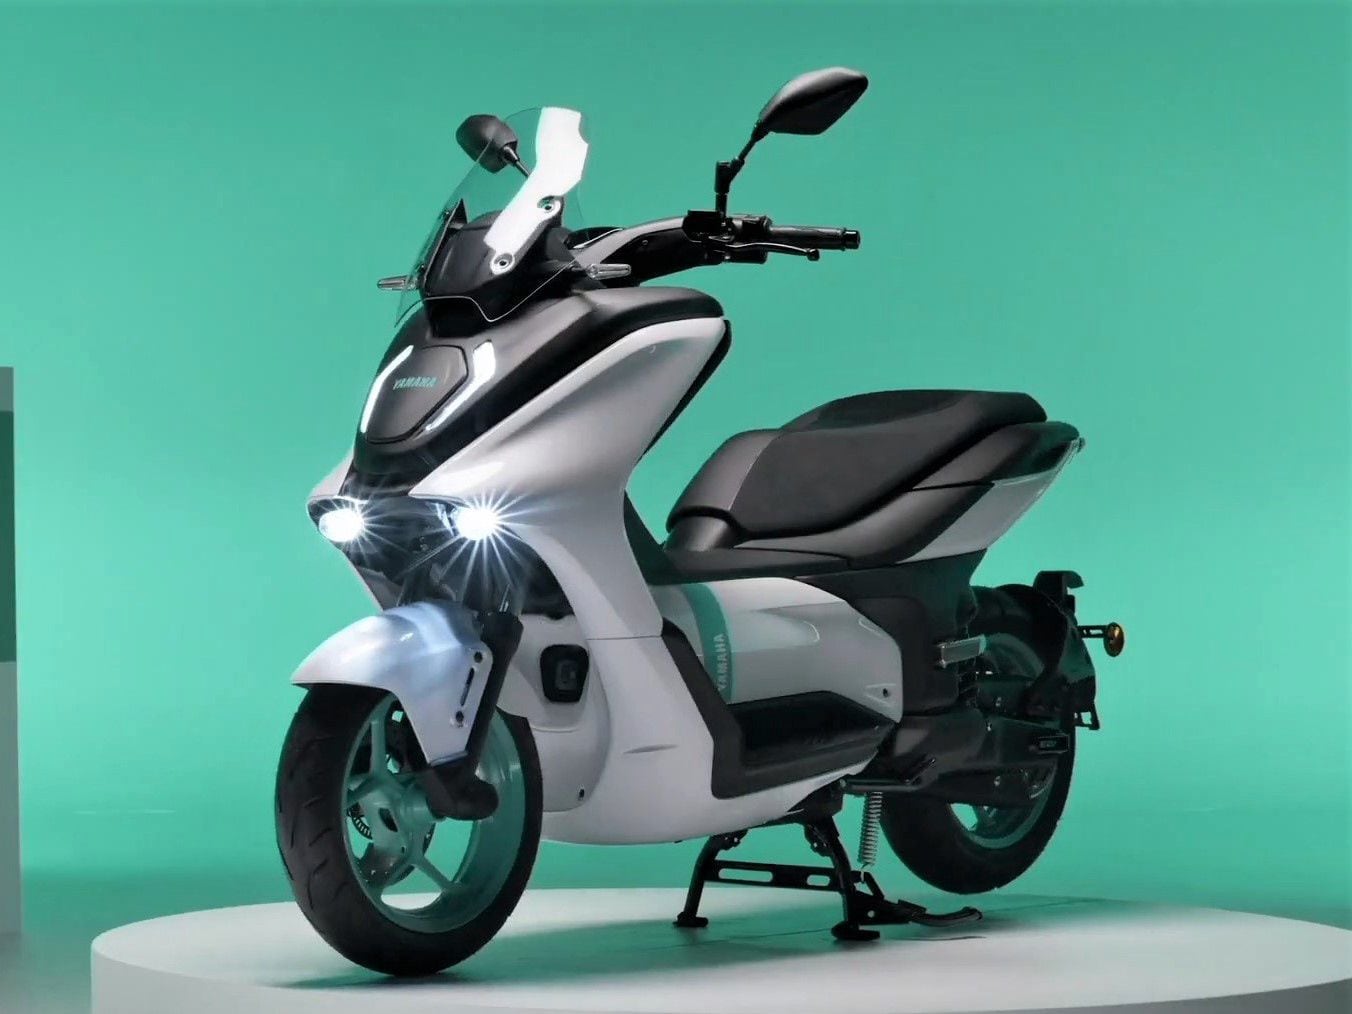 The 125cc-equivalent E01 concept was first shown at the Tokyo Motor Show in 2019, but patents for the production model surfaced last year.